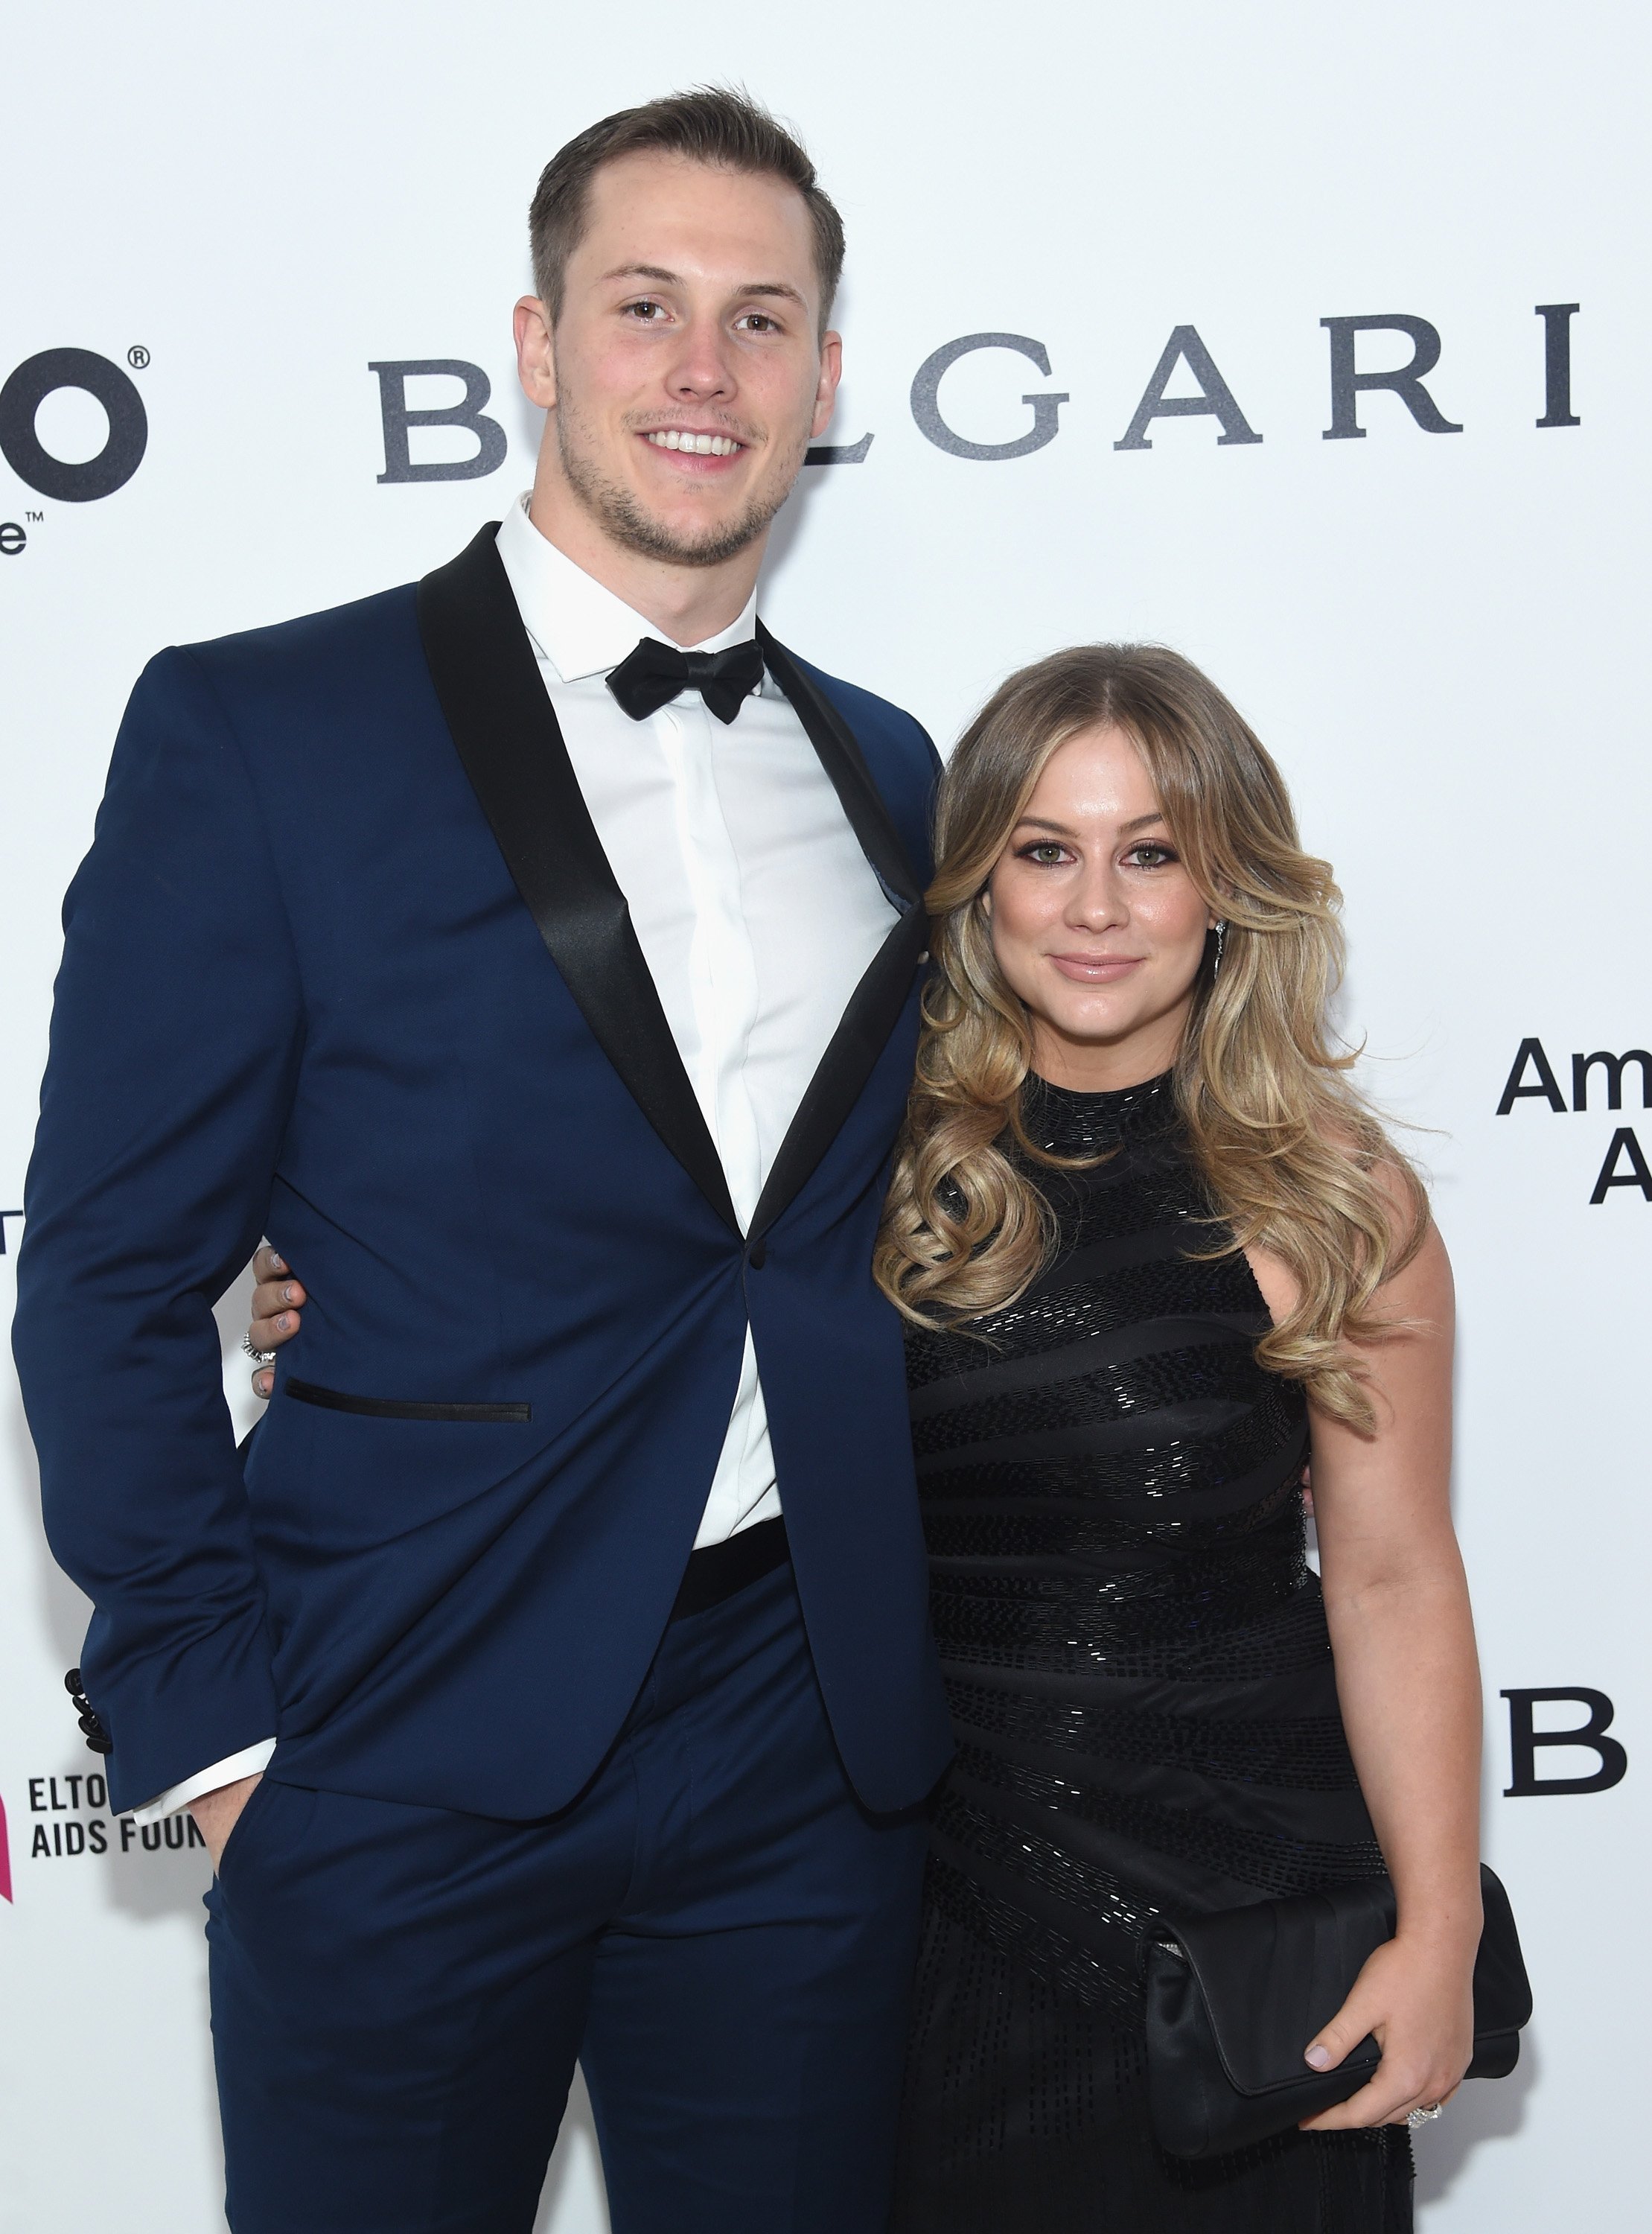 Olympic Gymnast Shawn Johnson and Andrew East attend the 25th Annual Elton John AIDS Foundation's Academy Awards Viewing Party at The City of West Hollywood Park on February 26, 2017 in West Hollywood, California. | Source: Getty Images